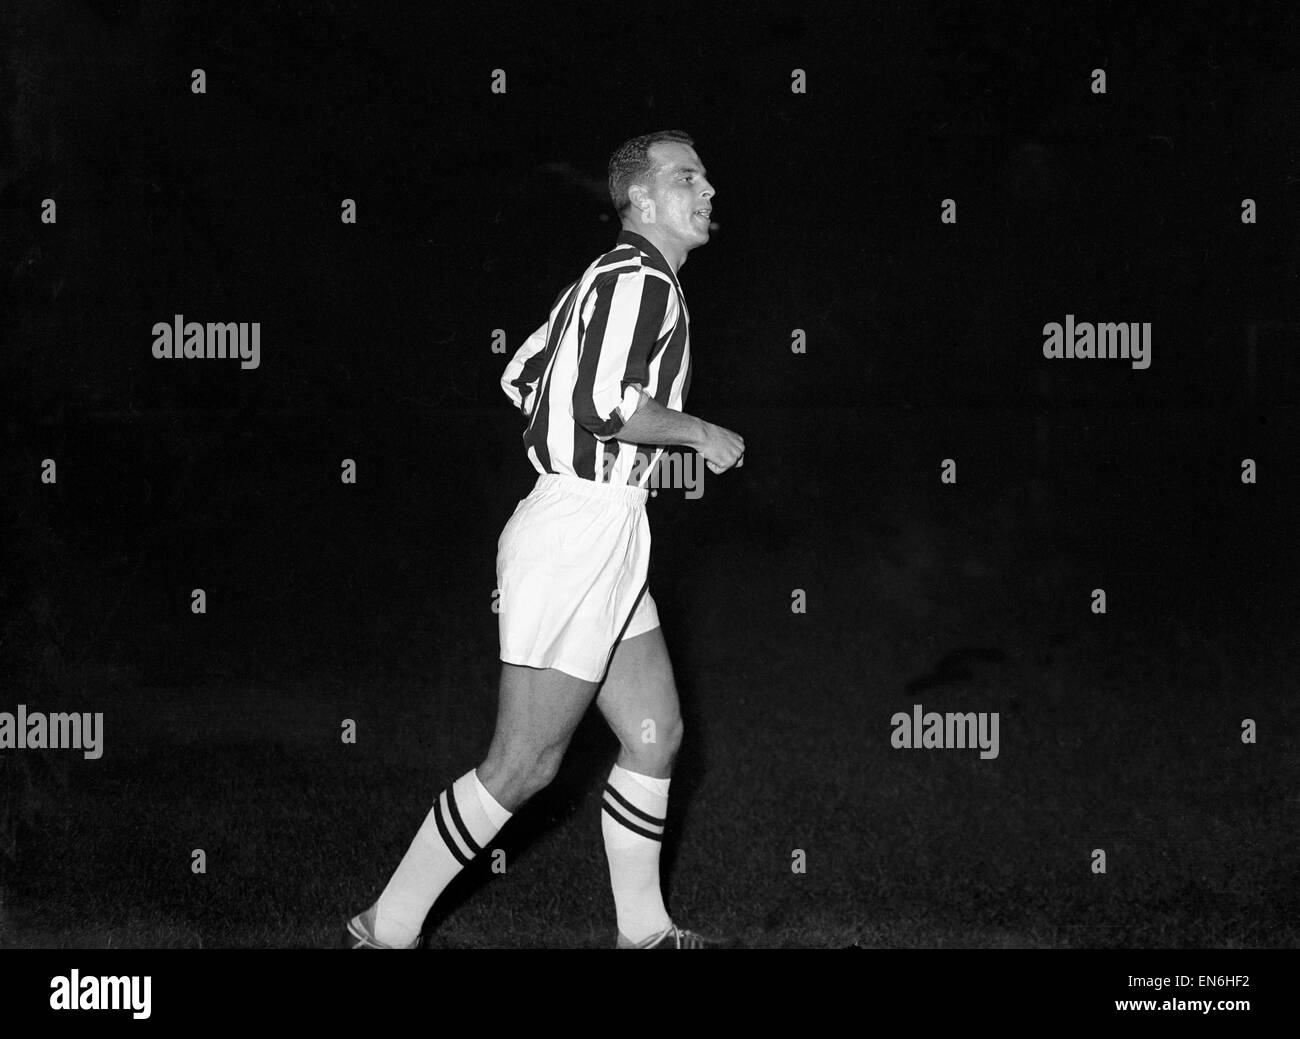 Arsenal v Juventus friendly match at Highbury. John Charles of Juventus walks out onto the pitch at Highbury, in the famous black and white kit of his Italian club side. 26th November 1958. Stock Photo